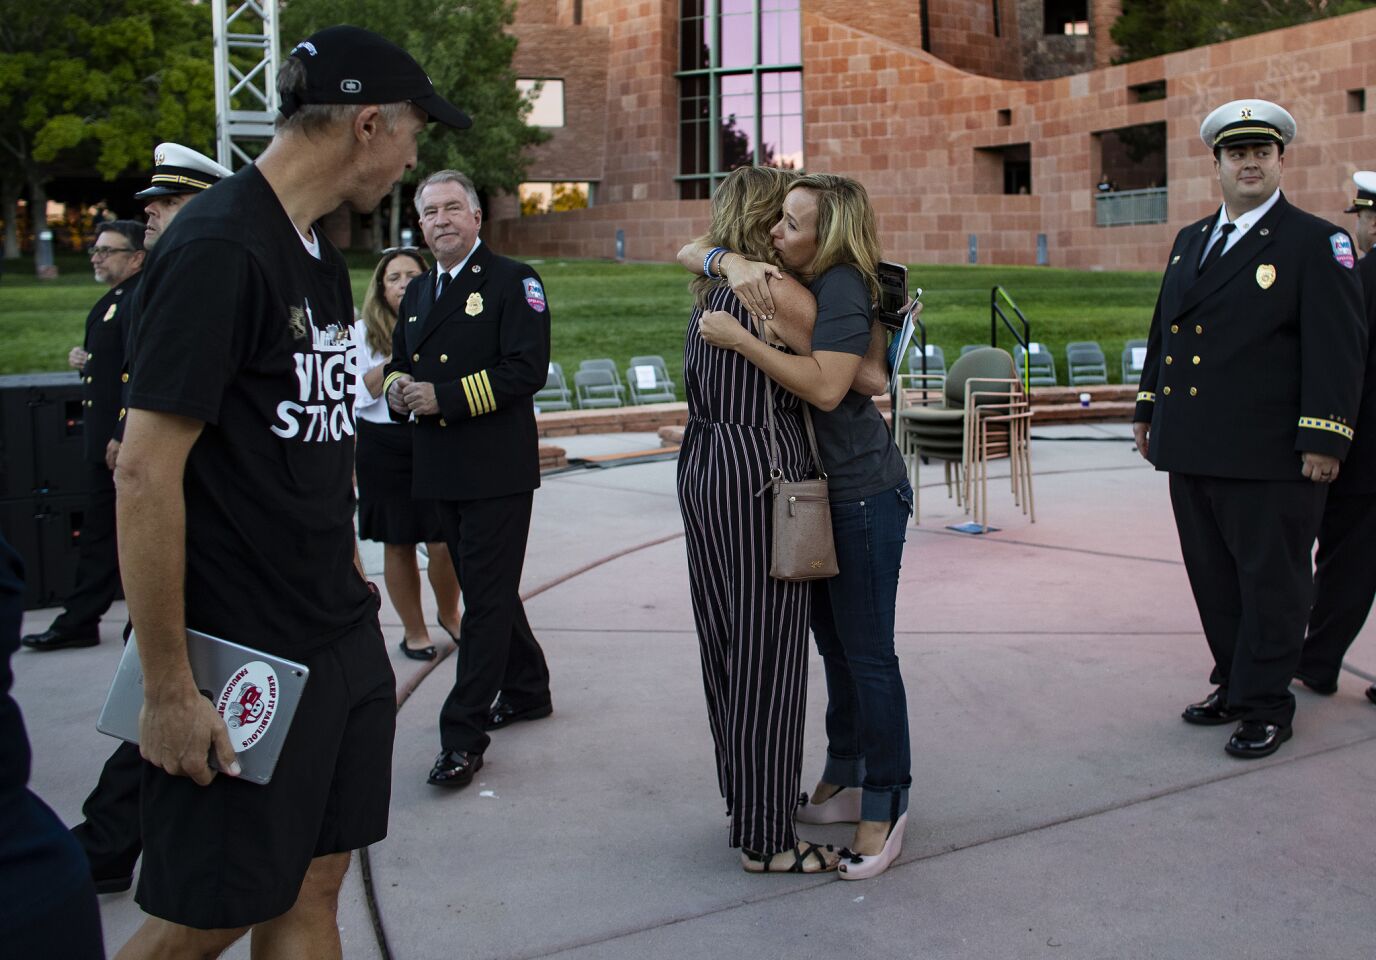 Mynda Smith, right, hugs Mary Jo Von Tillow after the sunrise remembrance. Smith's sister Neysa Tonks and Von Tillow's husband, Kurt, were killed in the Las Vegas shooting.